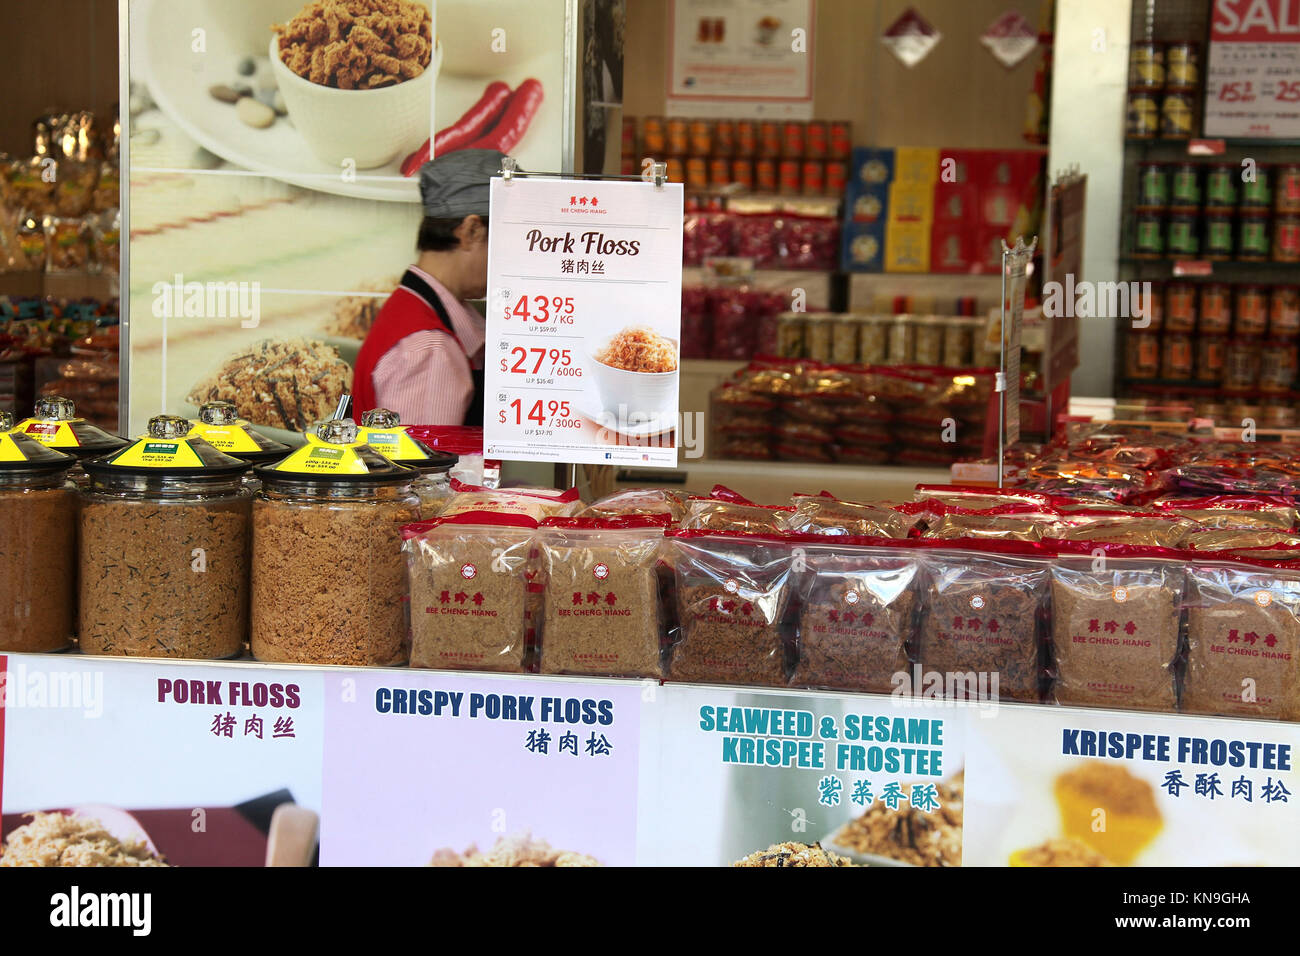 Food stall at Chinatown in Singapore Stock Photo